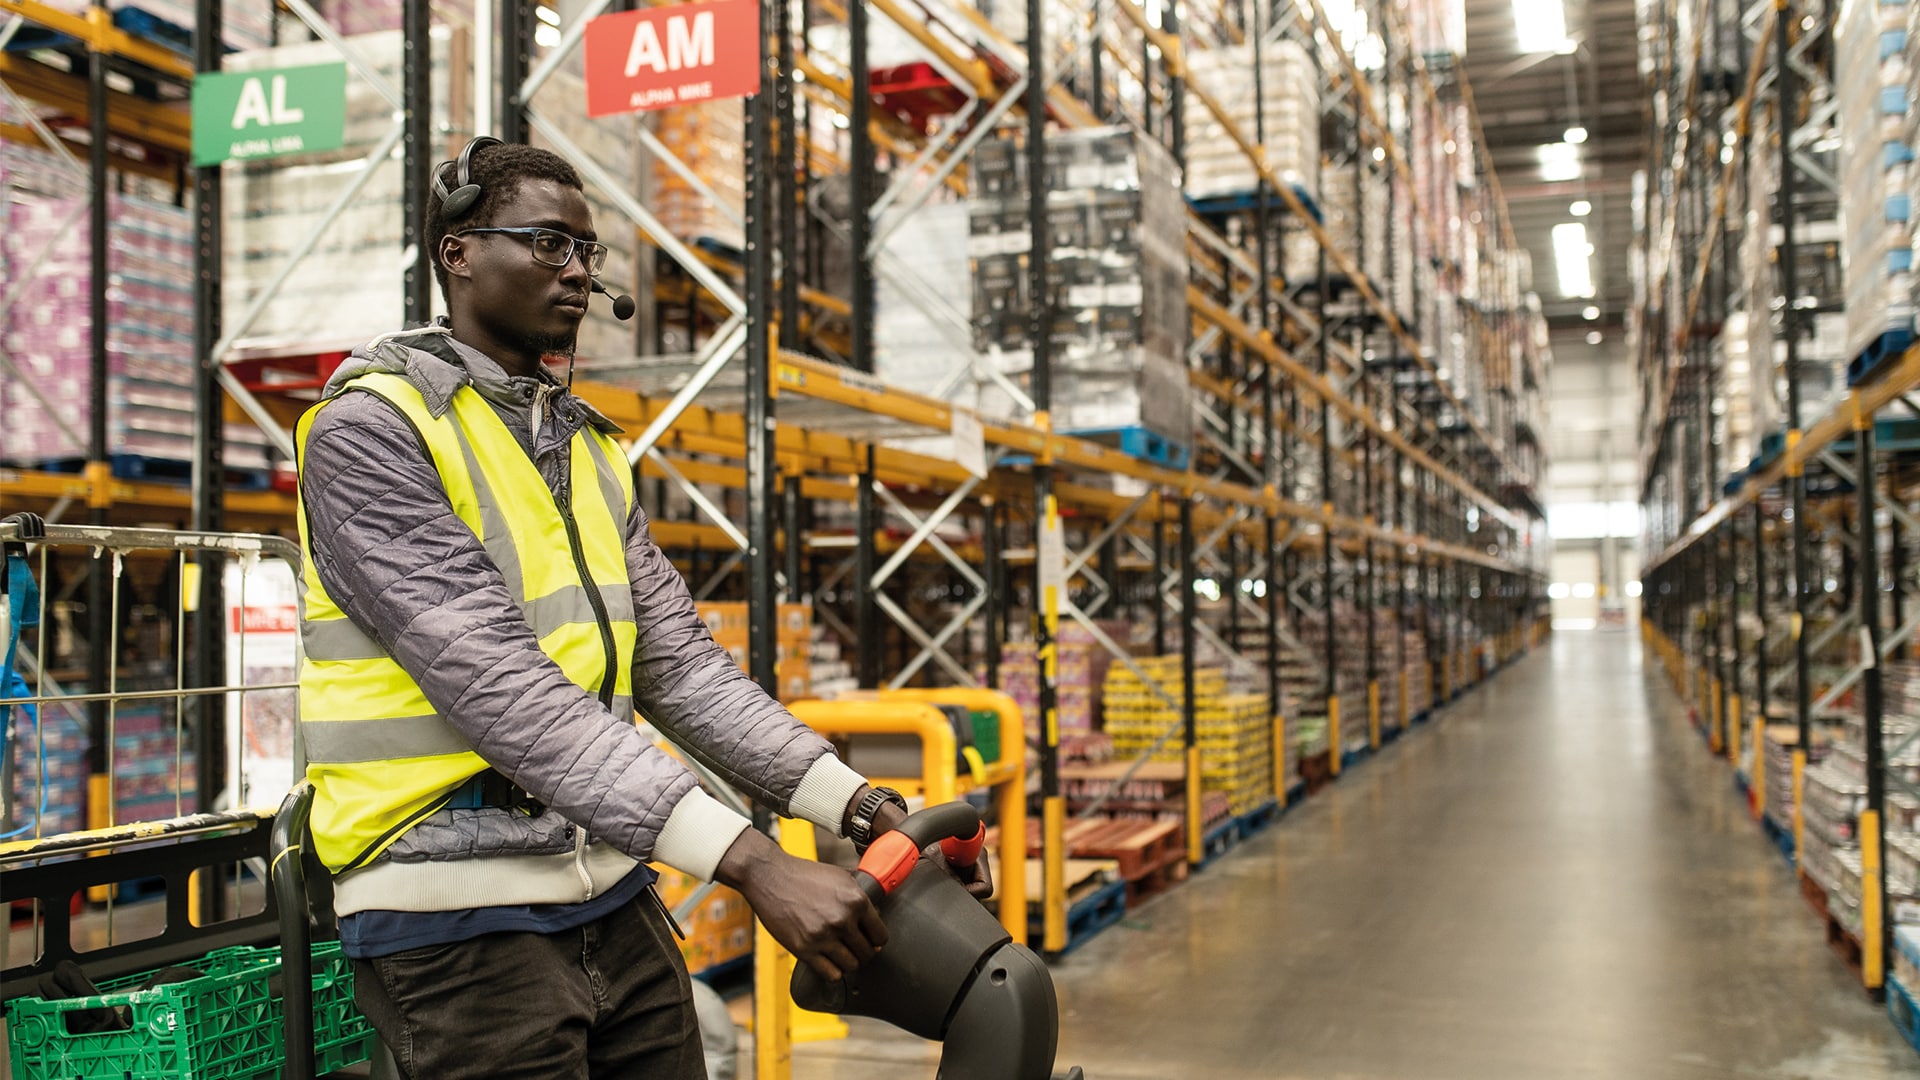 A photo of a man with a headset on and a high-vis at a warehouse.